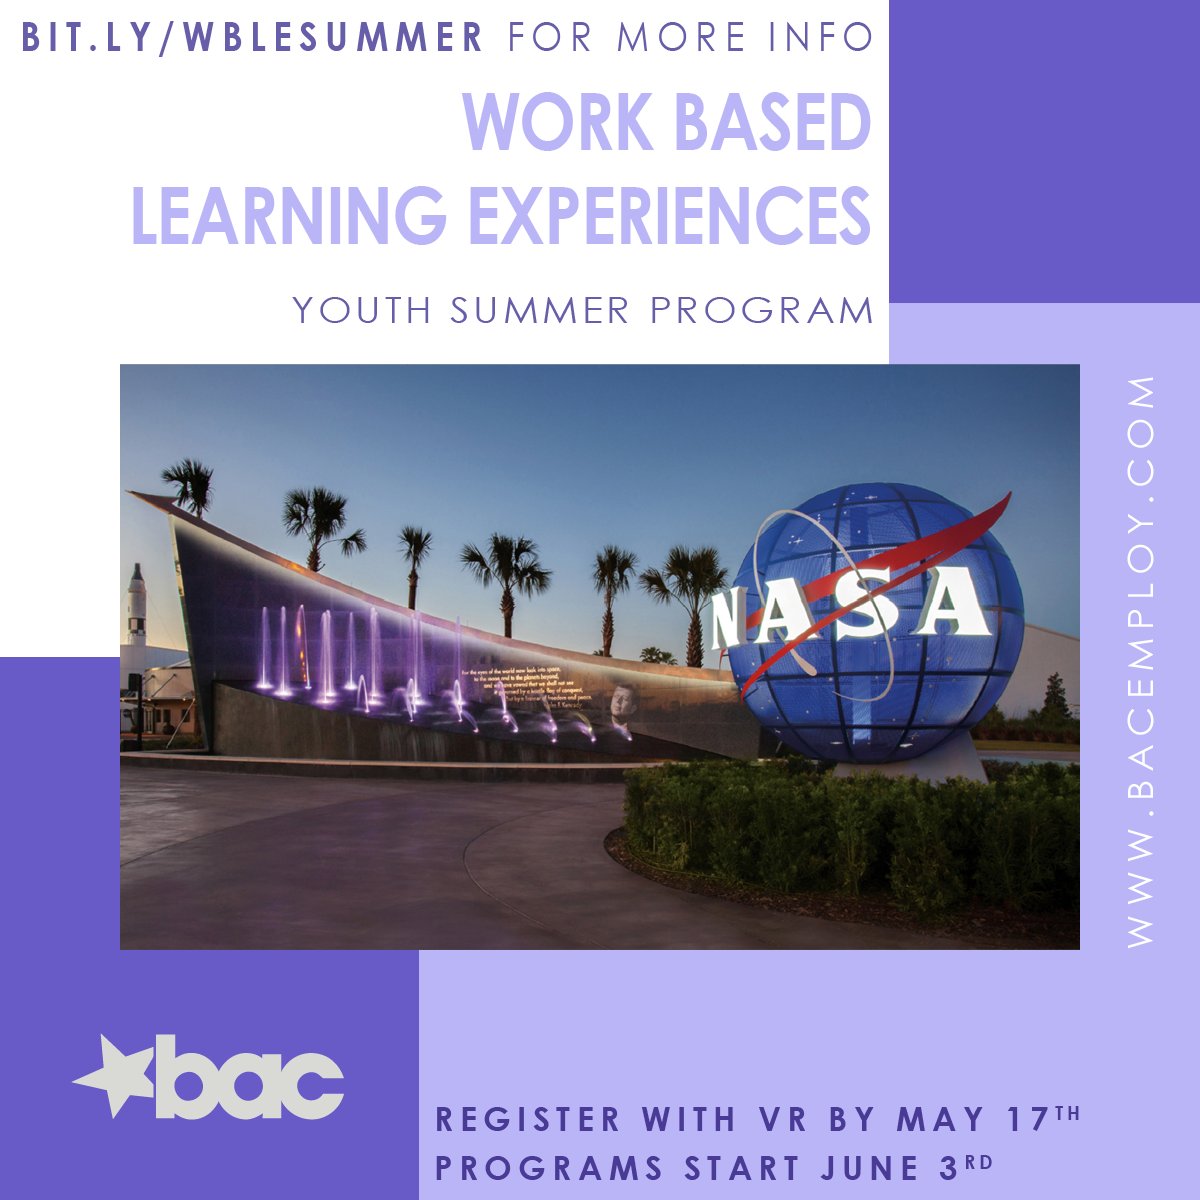 🚀 Launch into a summer of discovery at Delaware North, Kennedy Space Center! Explore roles in Retail, F&B, and Guest Services from June to July. 🌟 📅 June 3-20 & July 8-25 📍 Merritt Island, FL ⏰ 9:30 AM - 3:00 PM Limited spots! bit.ly/WBLESummer #EmployEmpower